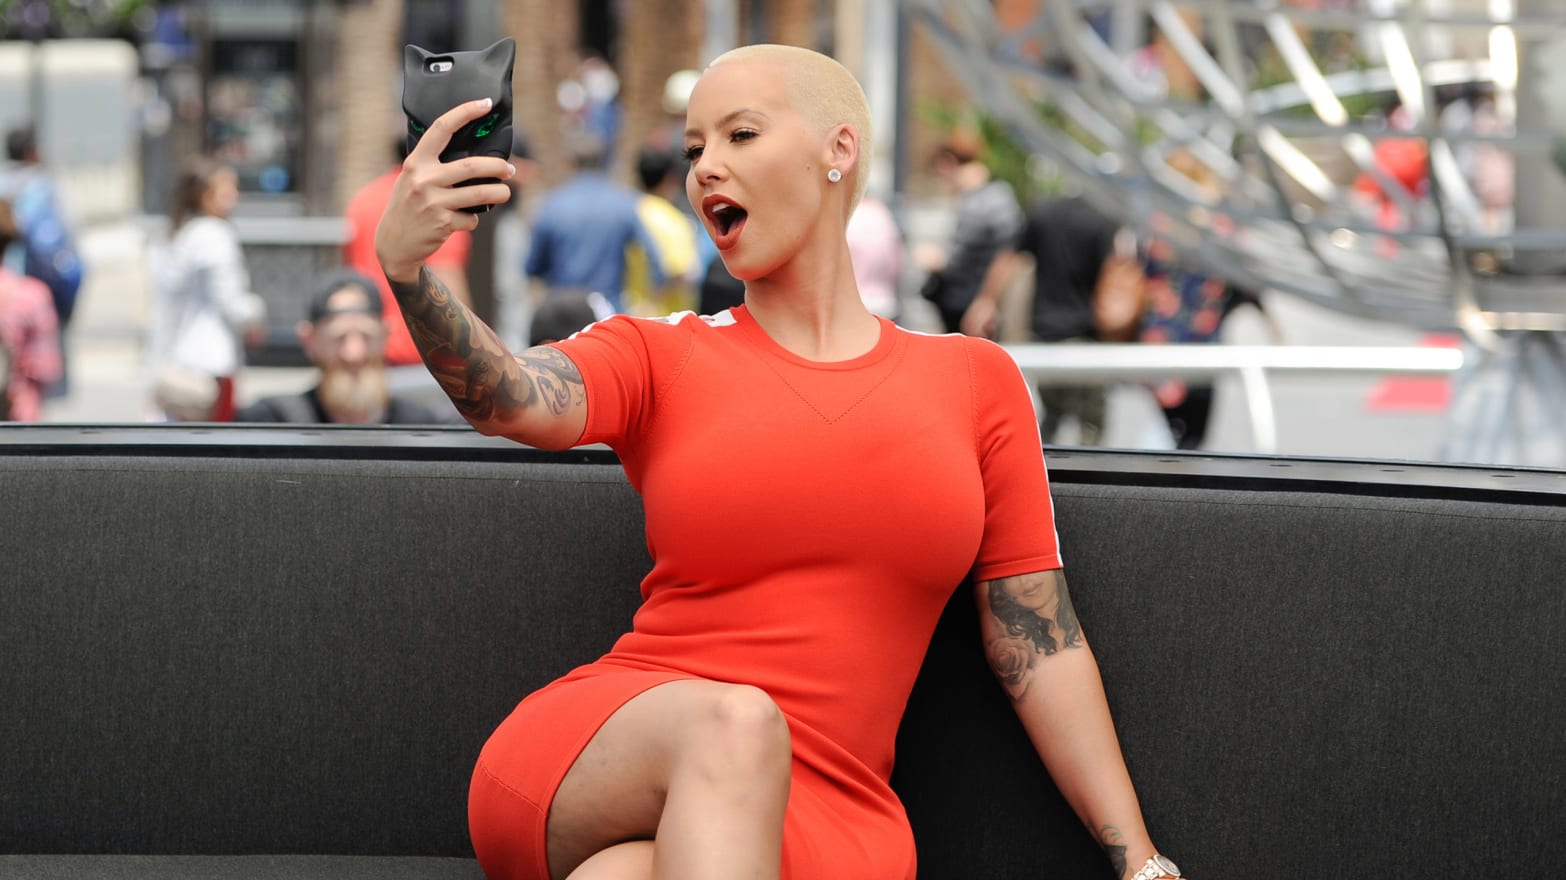 Dead R. reccomend perry this looking katy amber rose